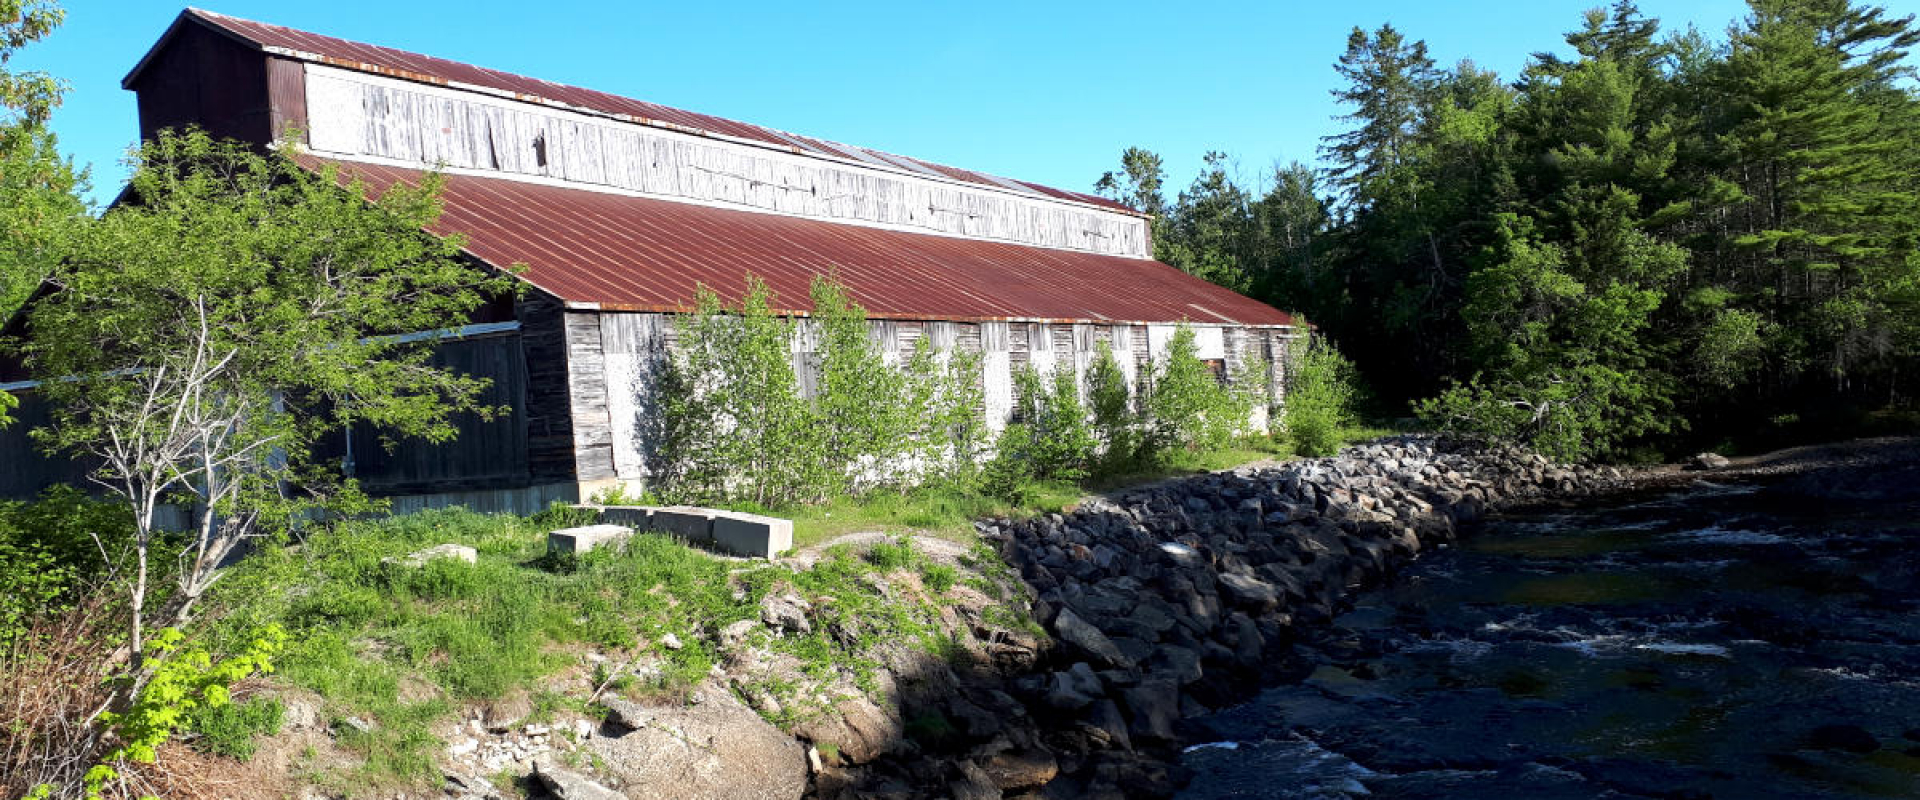 An old, weathered axe factory building that's surrounded by trees on the rocky shore of the St. Croix River. 